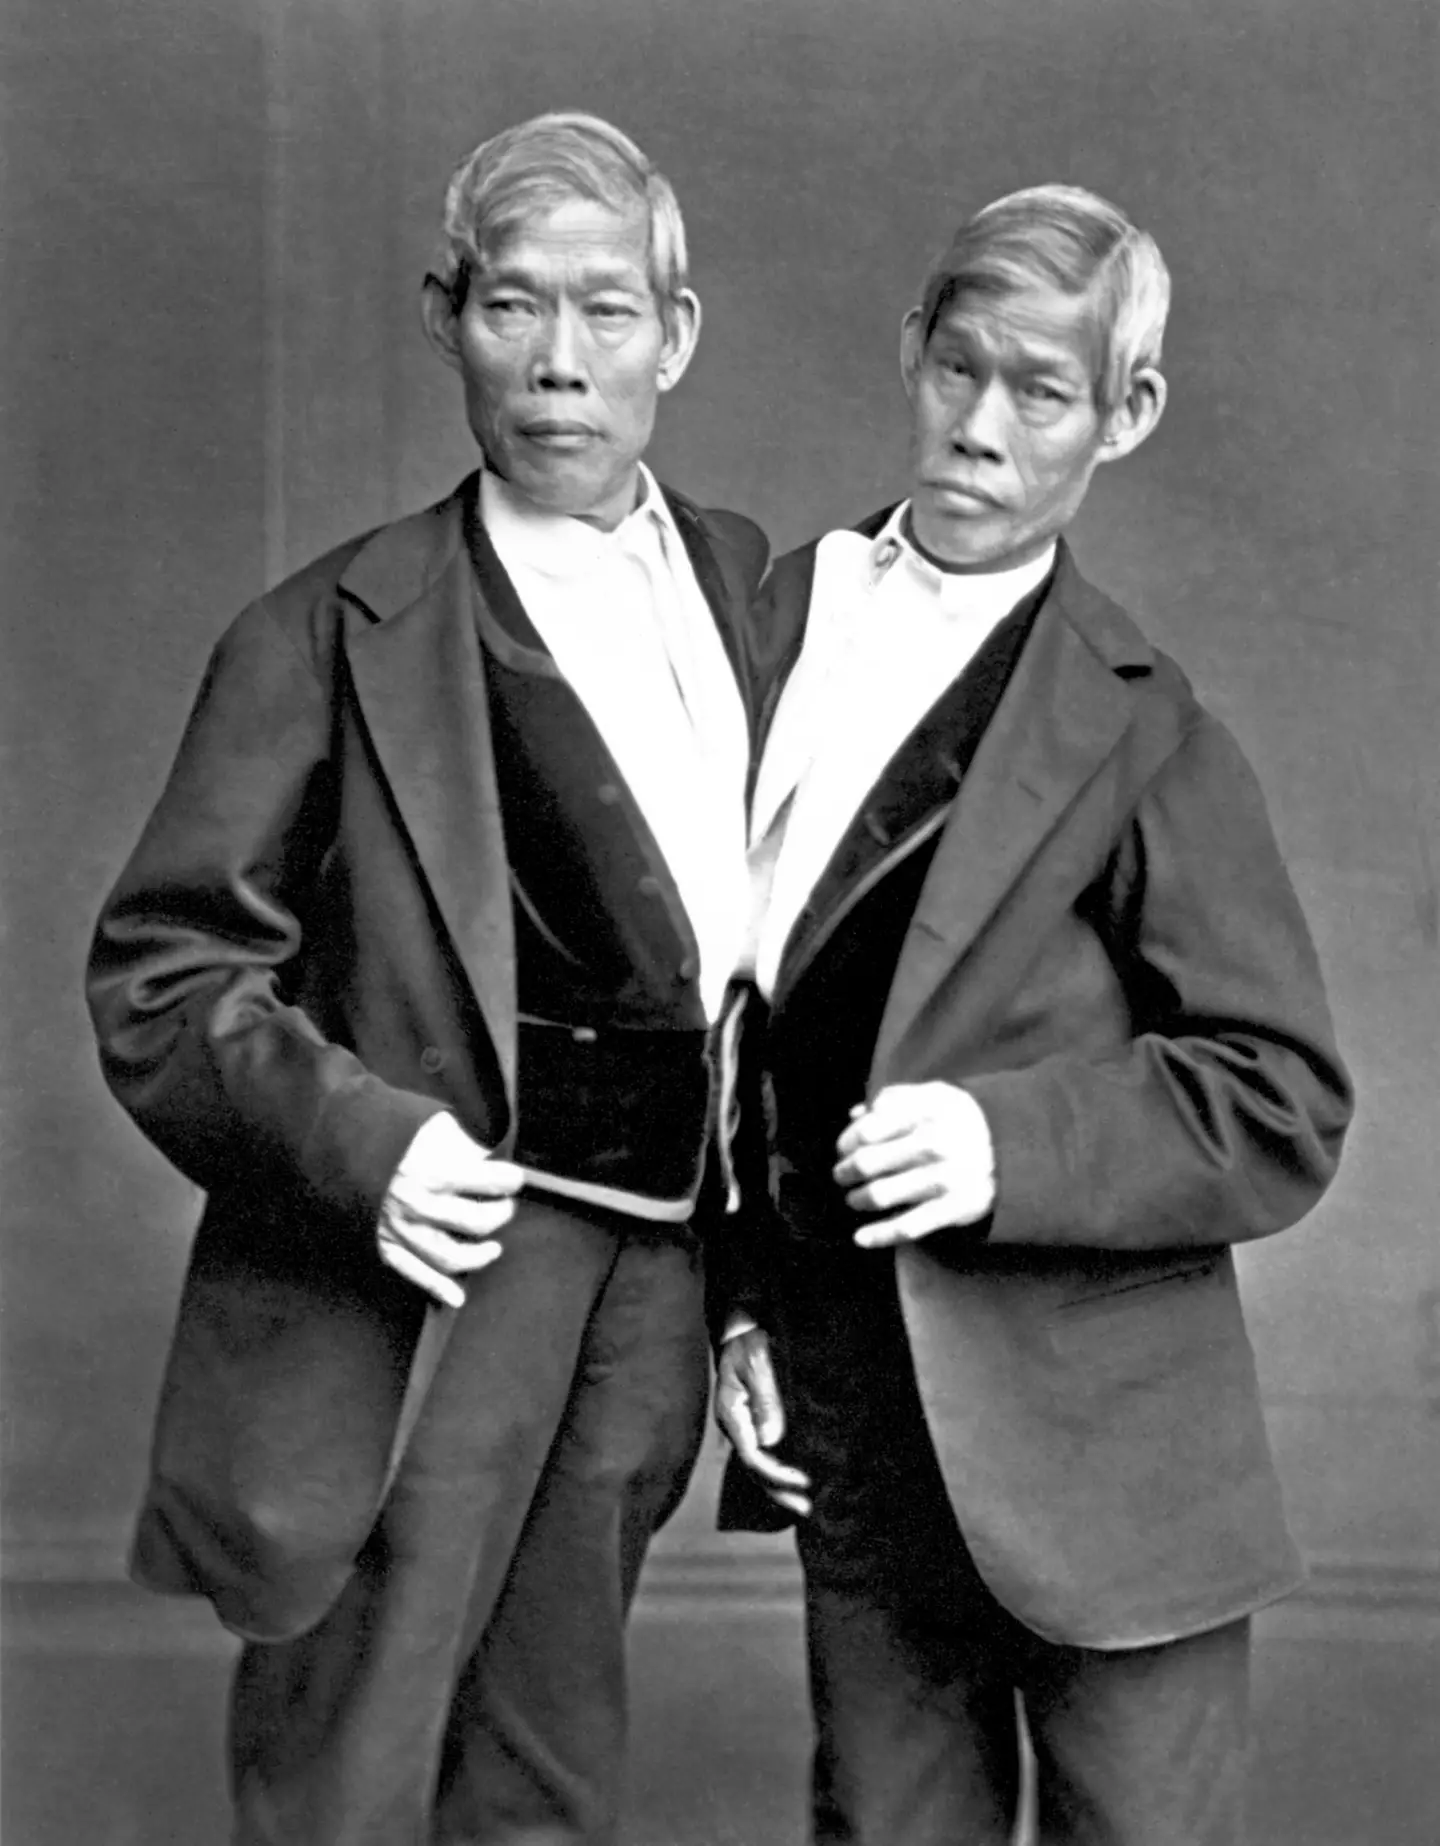 Conjoined twins Chang and Eng Bunker were arrested but not prosecuted, and we don't know whether they'd really have been able to be punished. (History/Universal Images Group via Getty Images)